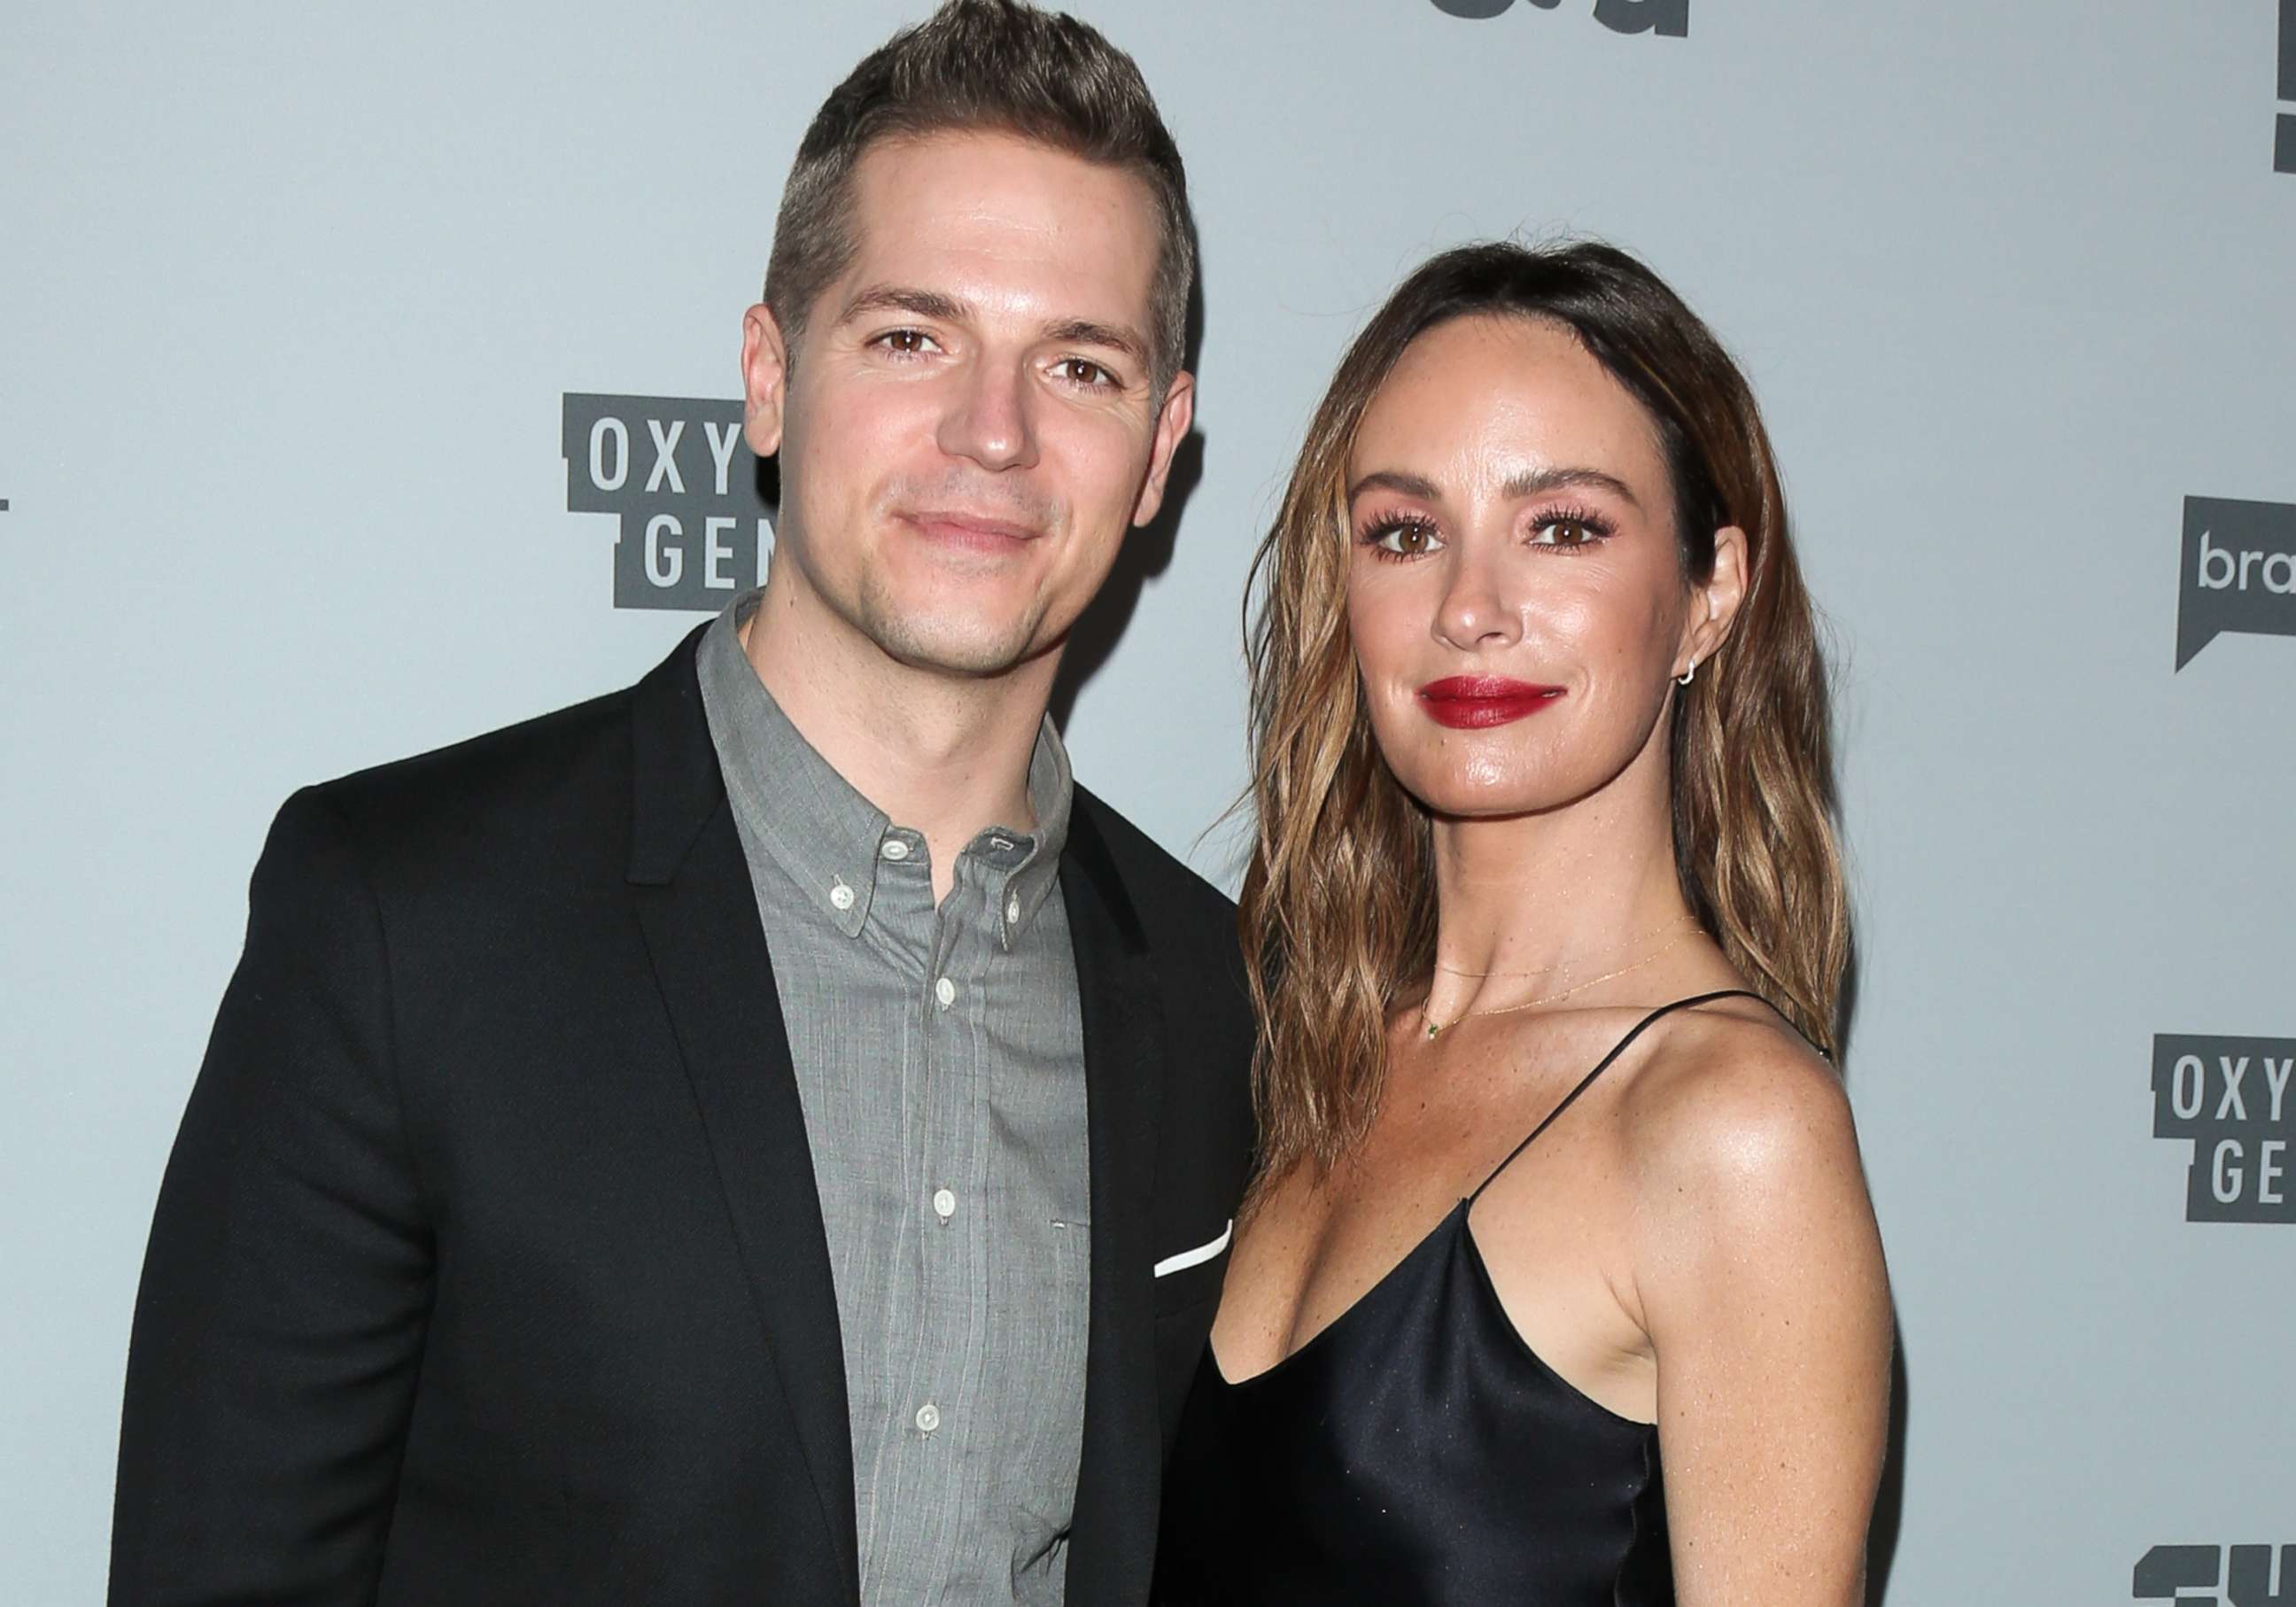 TV personalities Jason Kennedy, left, and Catt Sadler attend NBCUniversal's press junket at Beauty & Essex on November 13, 2017 in Los Angeles, Calif.